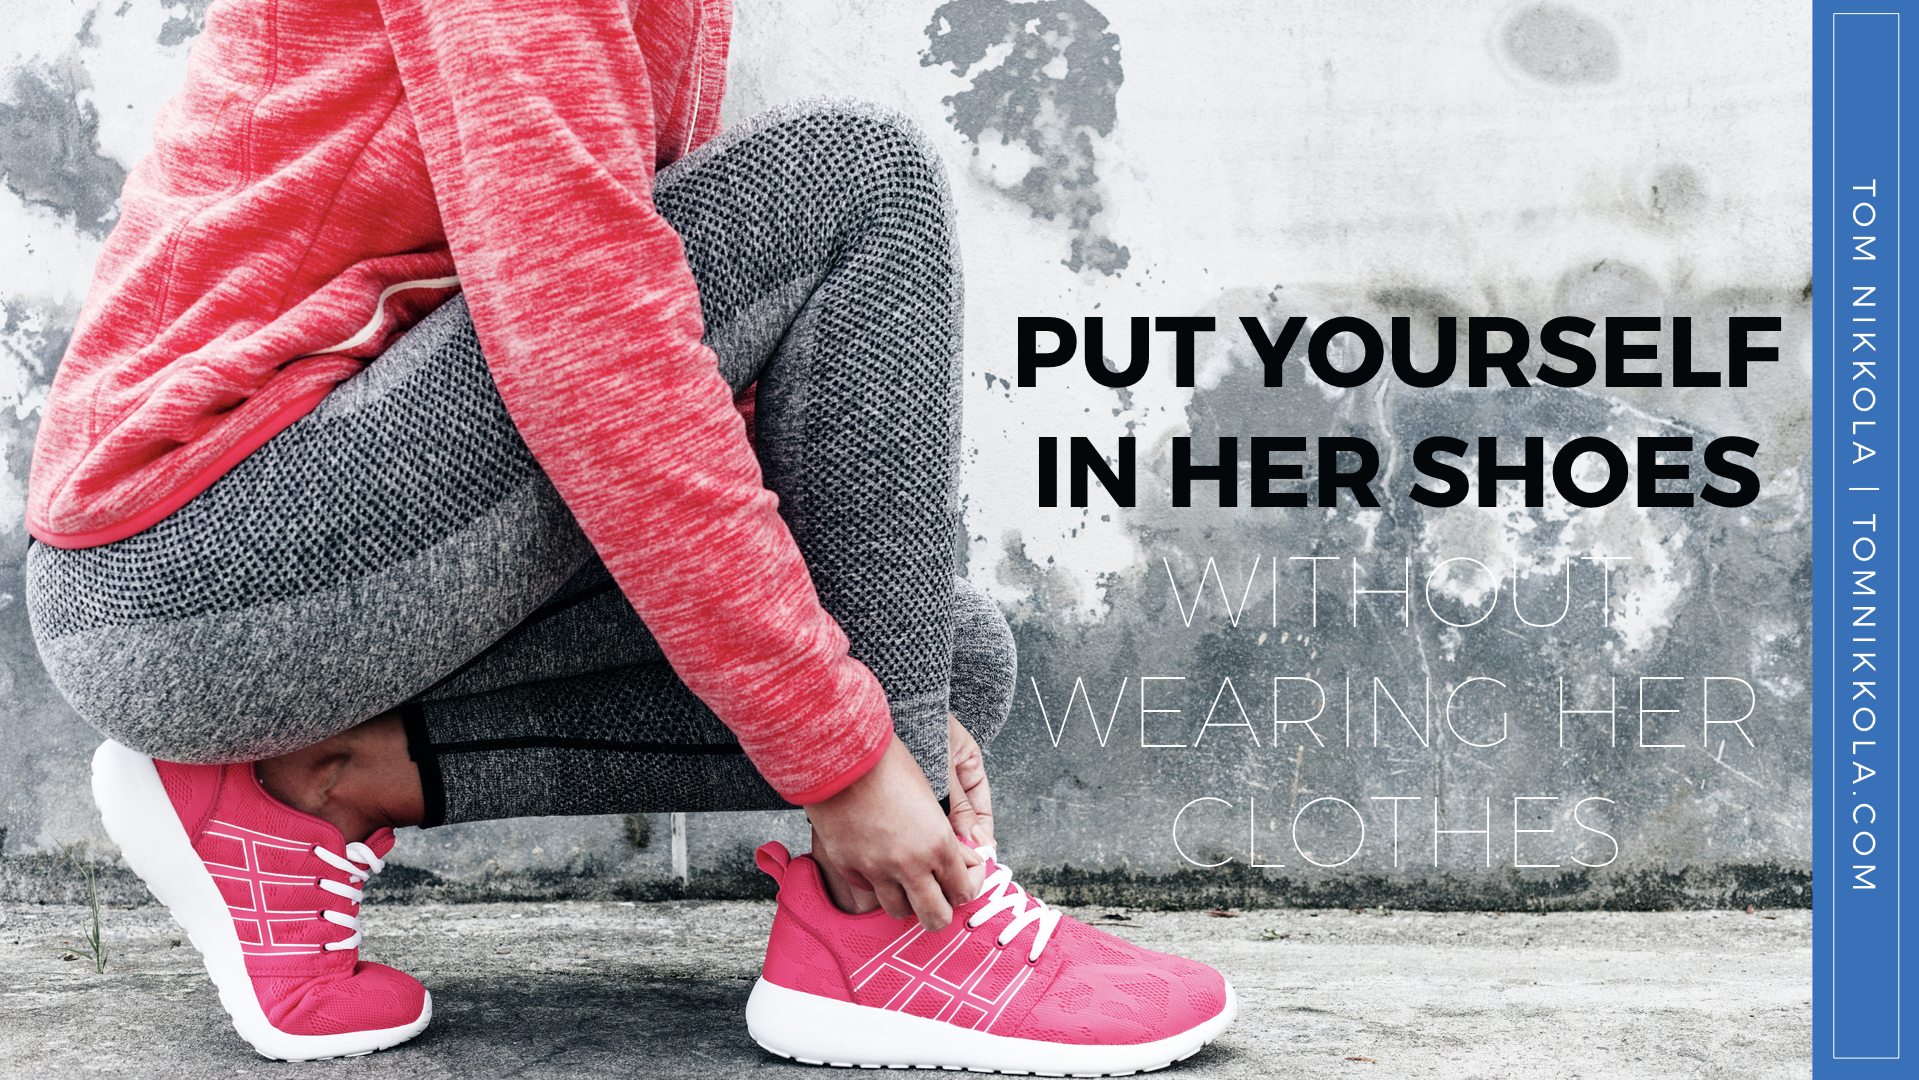 Put Yourself in Her Shoes Without Wearing Her Clothes | Tom Nikkola